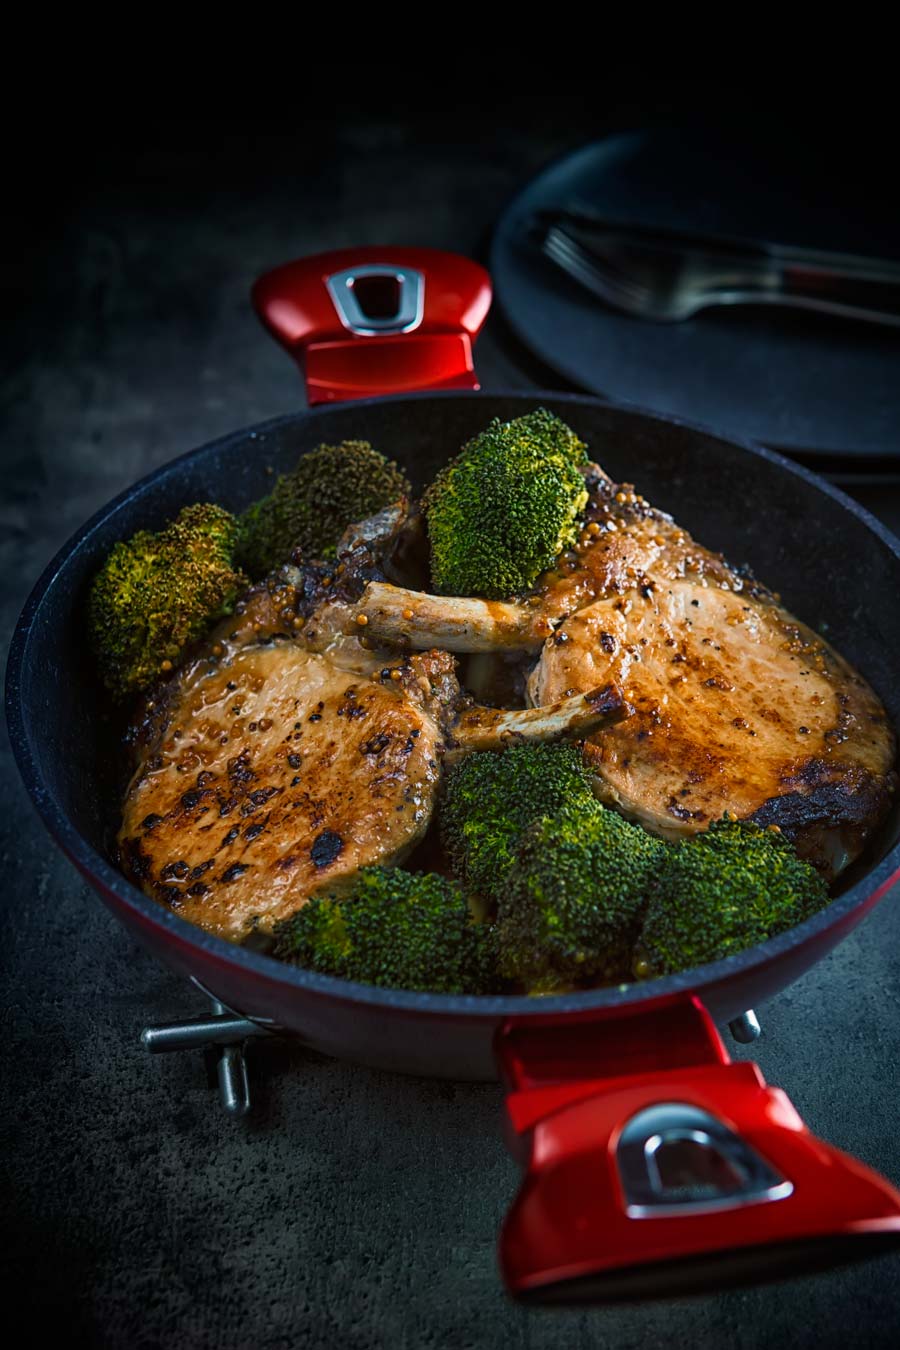 These honey mustard pork chops are baked in the oven together with parsnips and broccoli to create a simple but stunningly tasty complete meal.